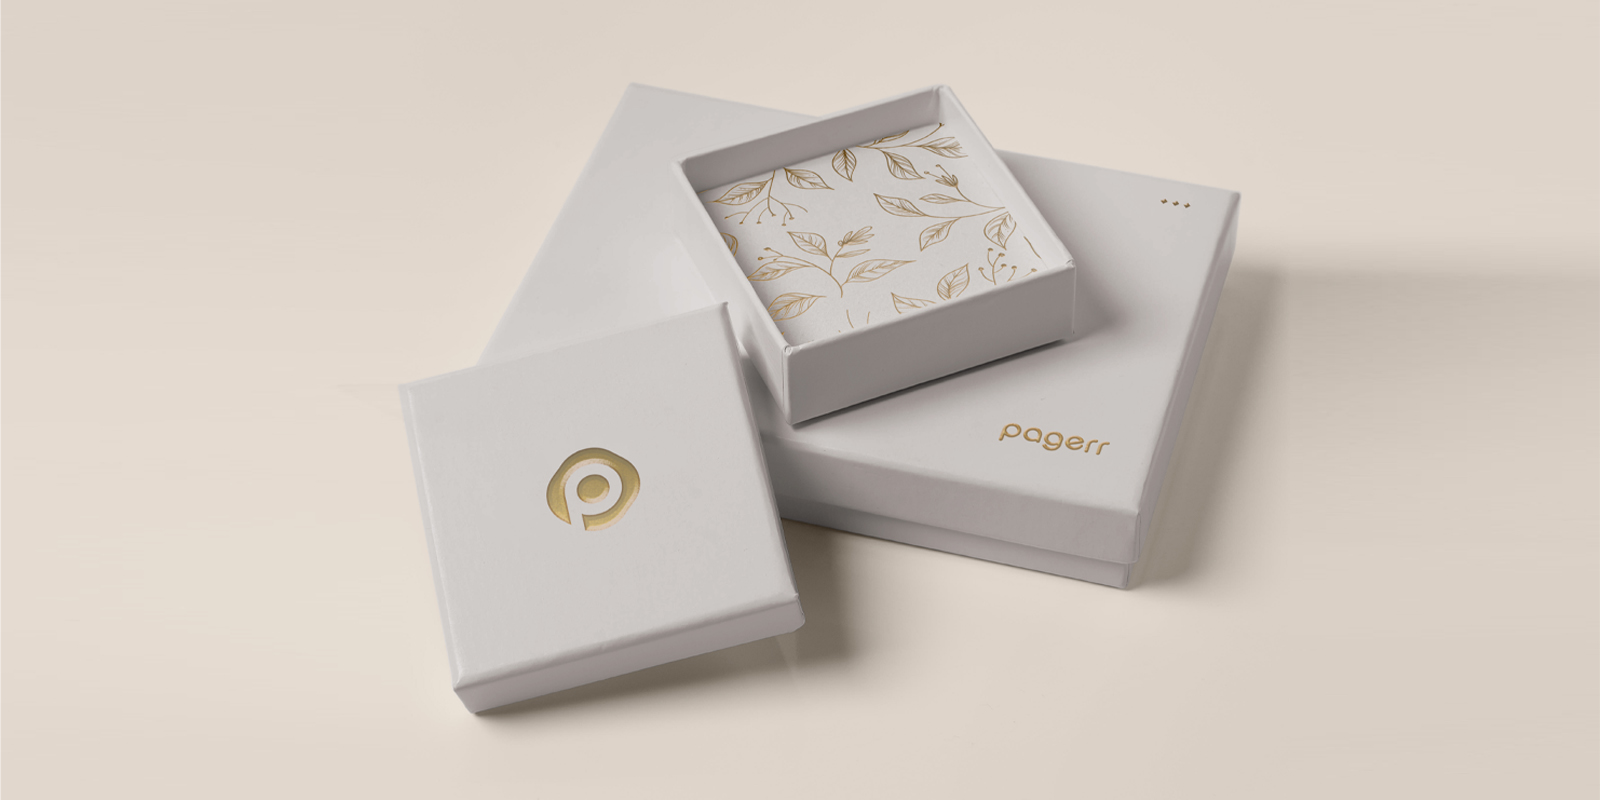 Product boxes in Townsville - Print with Pagerr